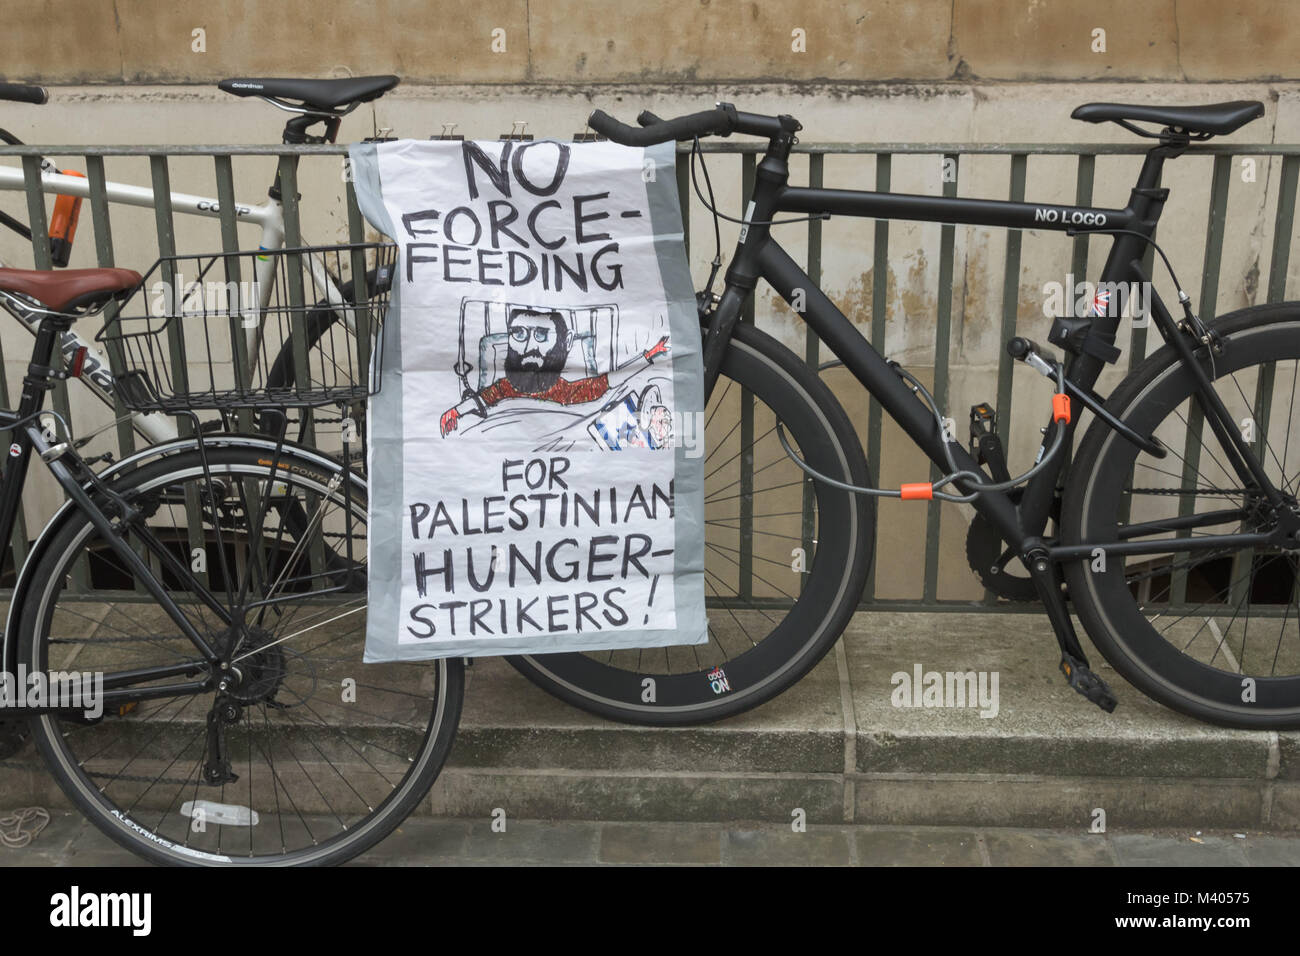 'No Force-Feeding for Palestinian Hunger-Strikers!, says  a banner brought to protesters at the BBC callng on it to report fairly about the illegal detention of Palestinians including the two hunger strikers. Stock Photo